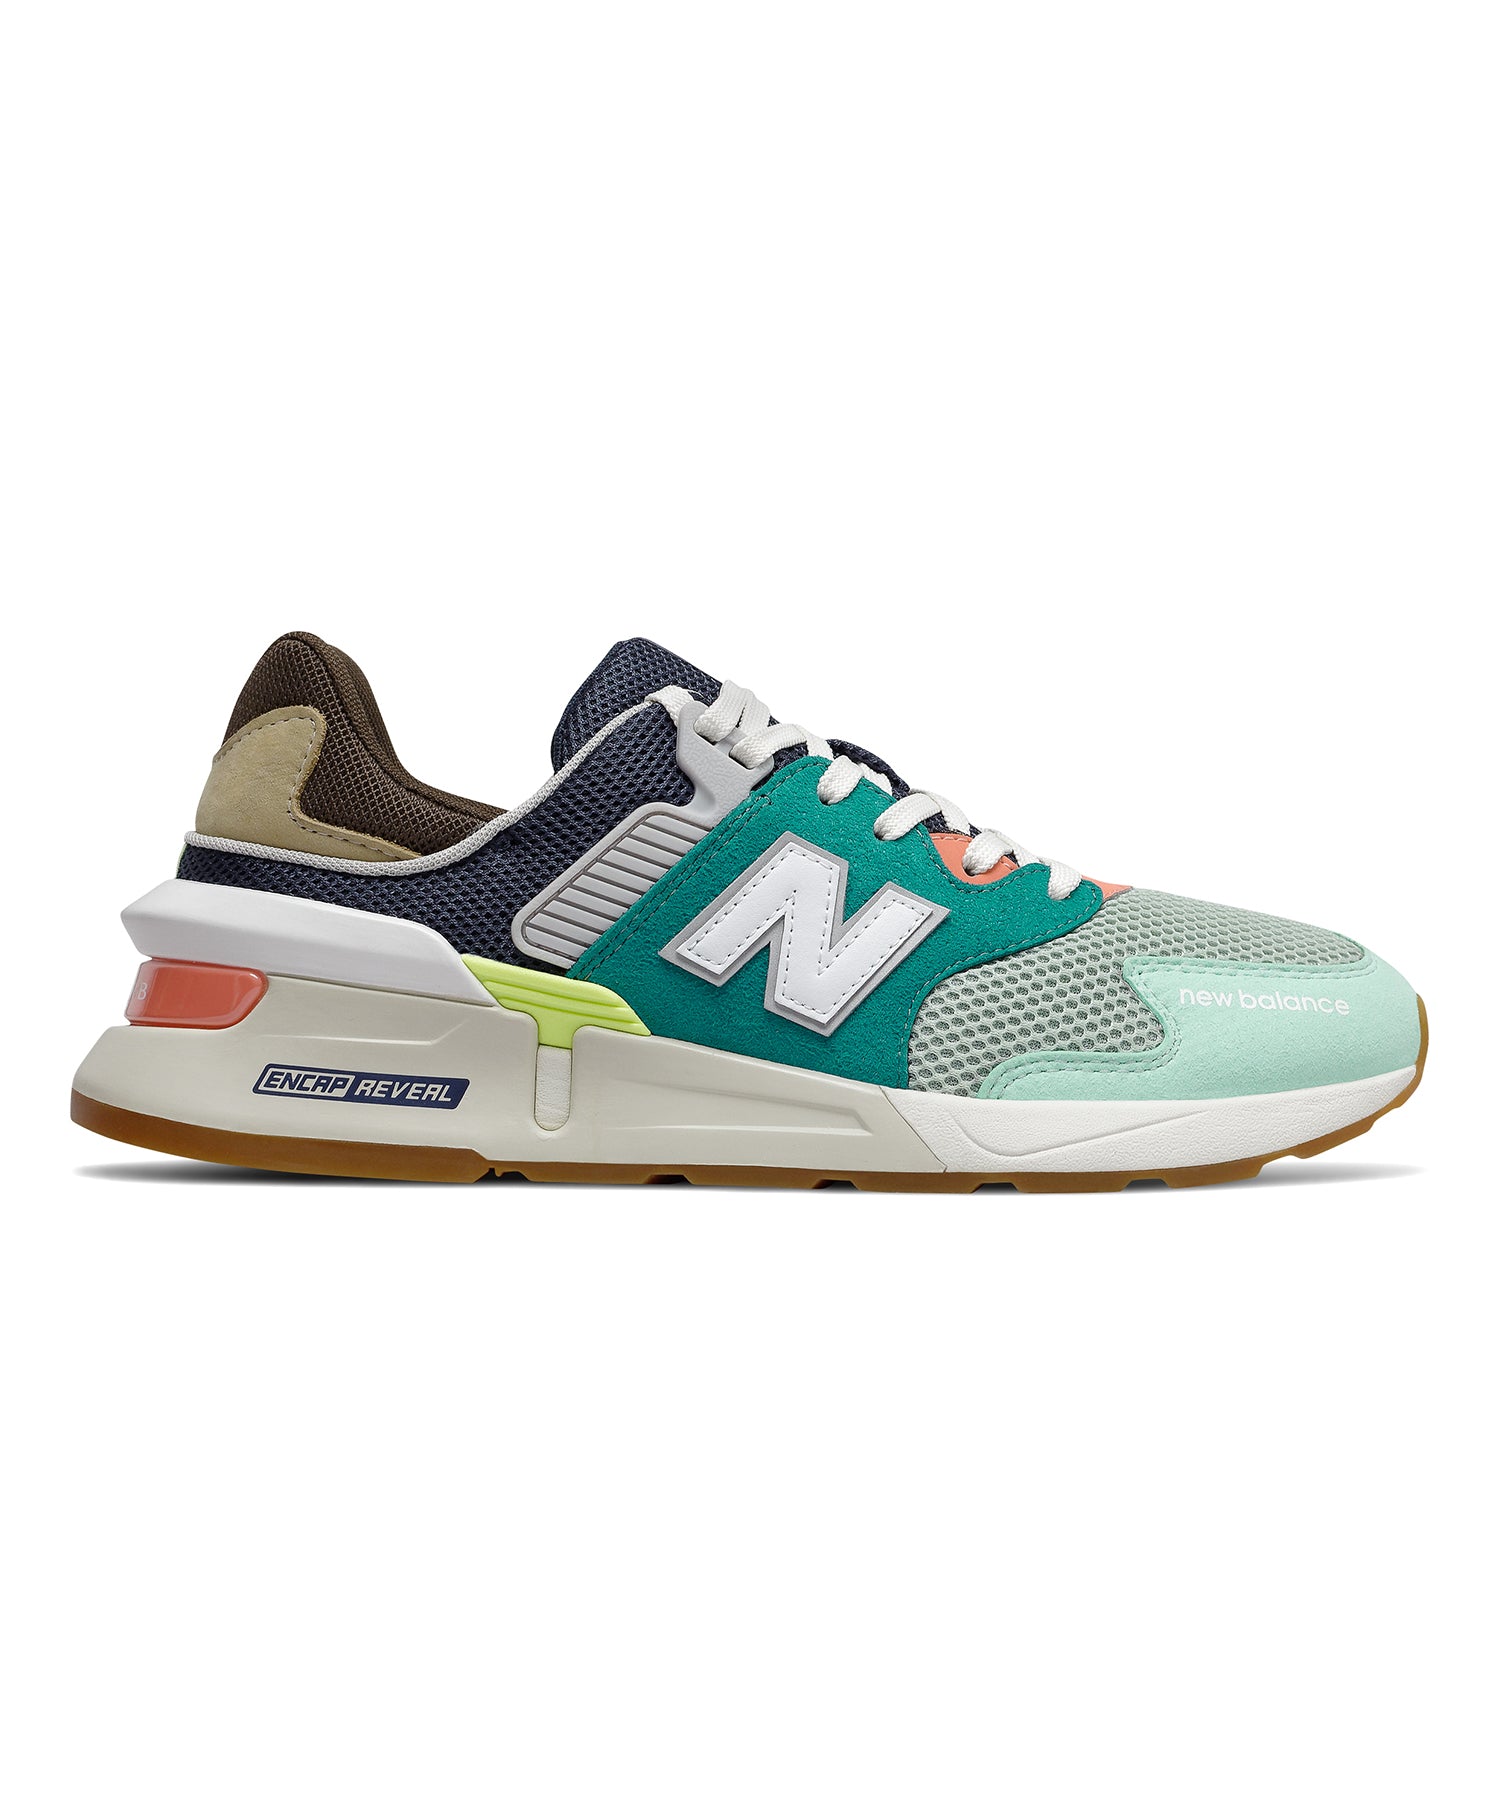 New Balance 997 Sport in Team Teal 